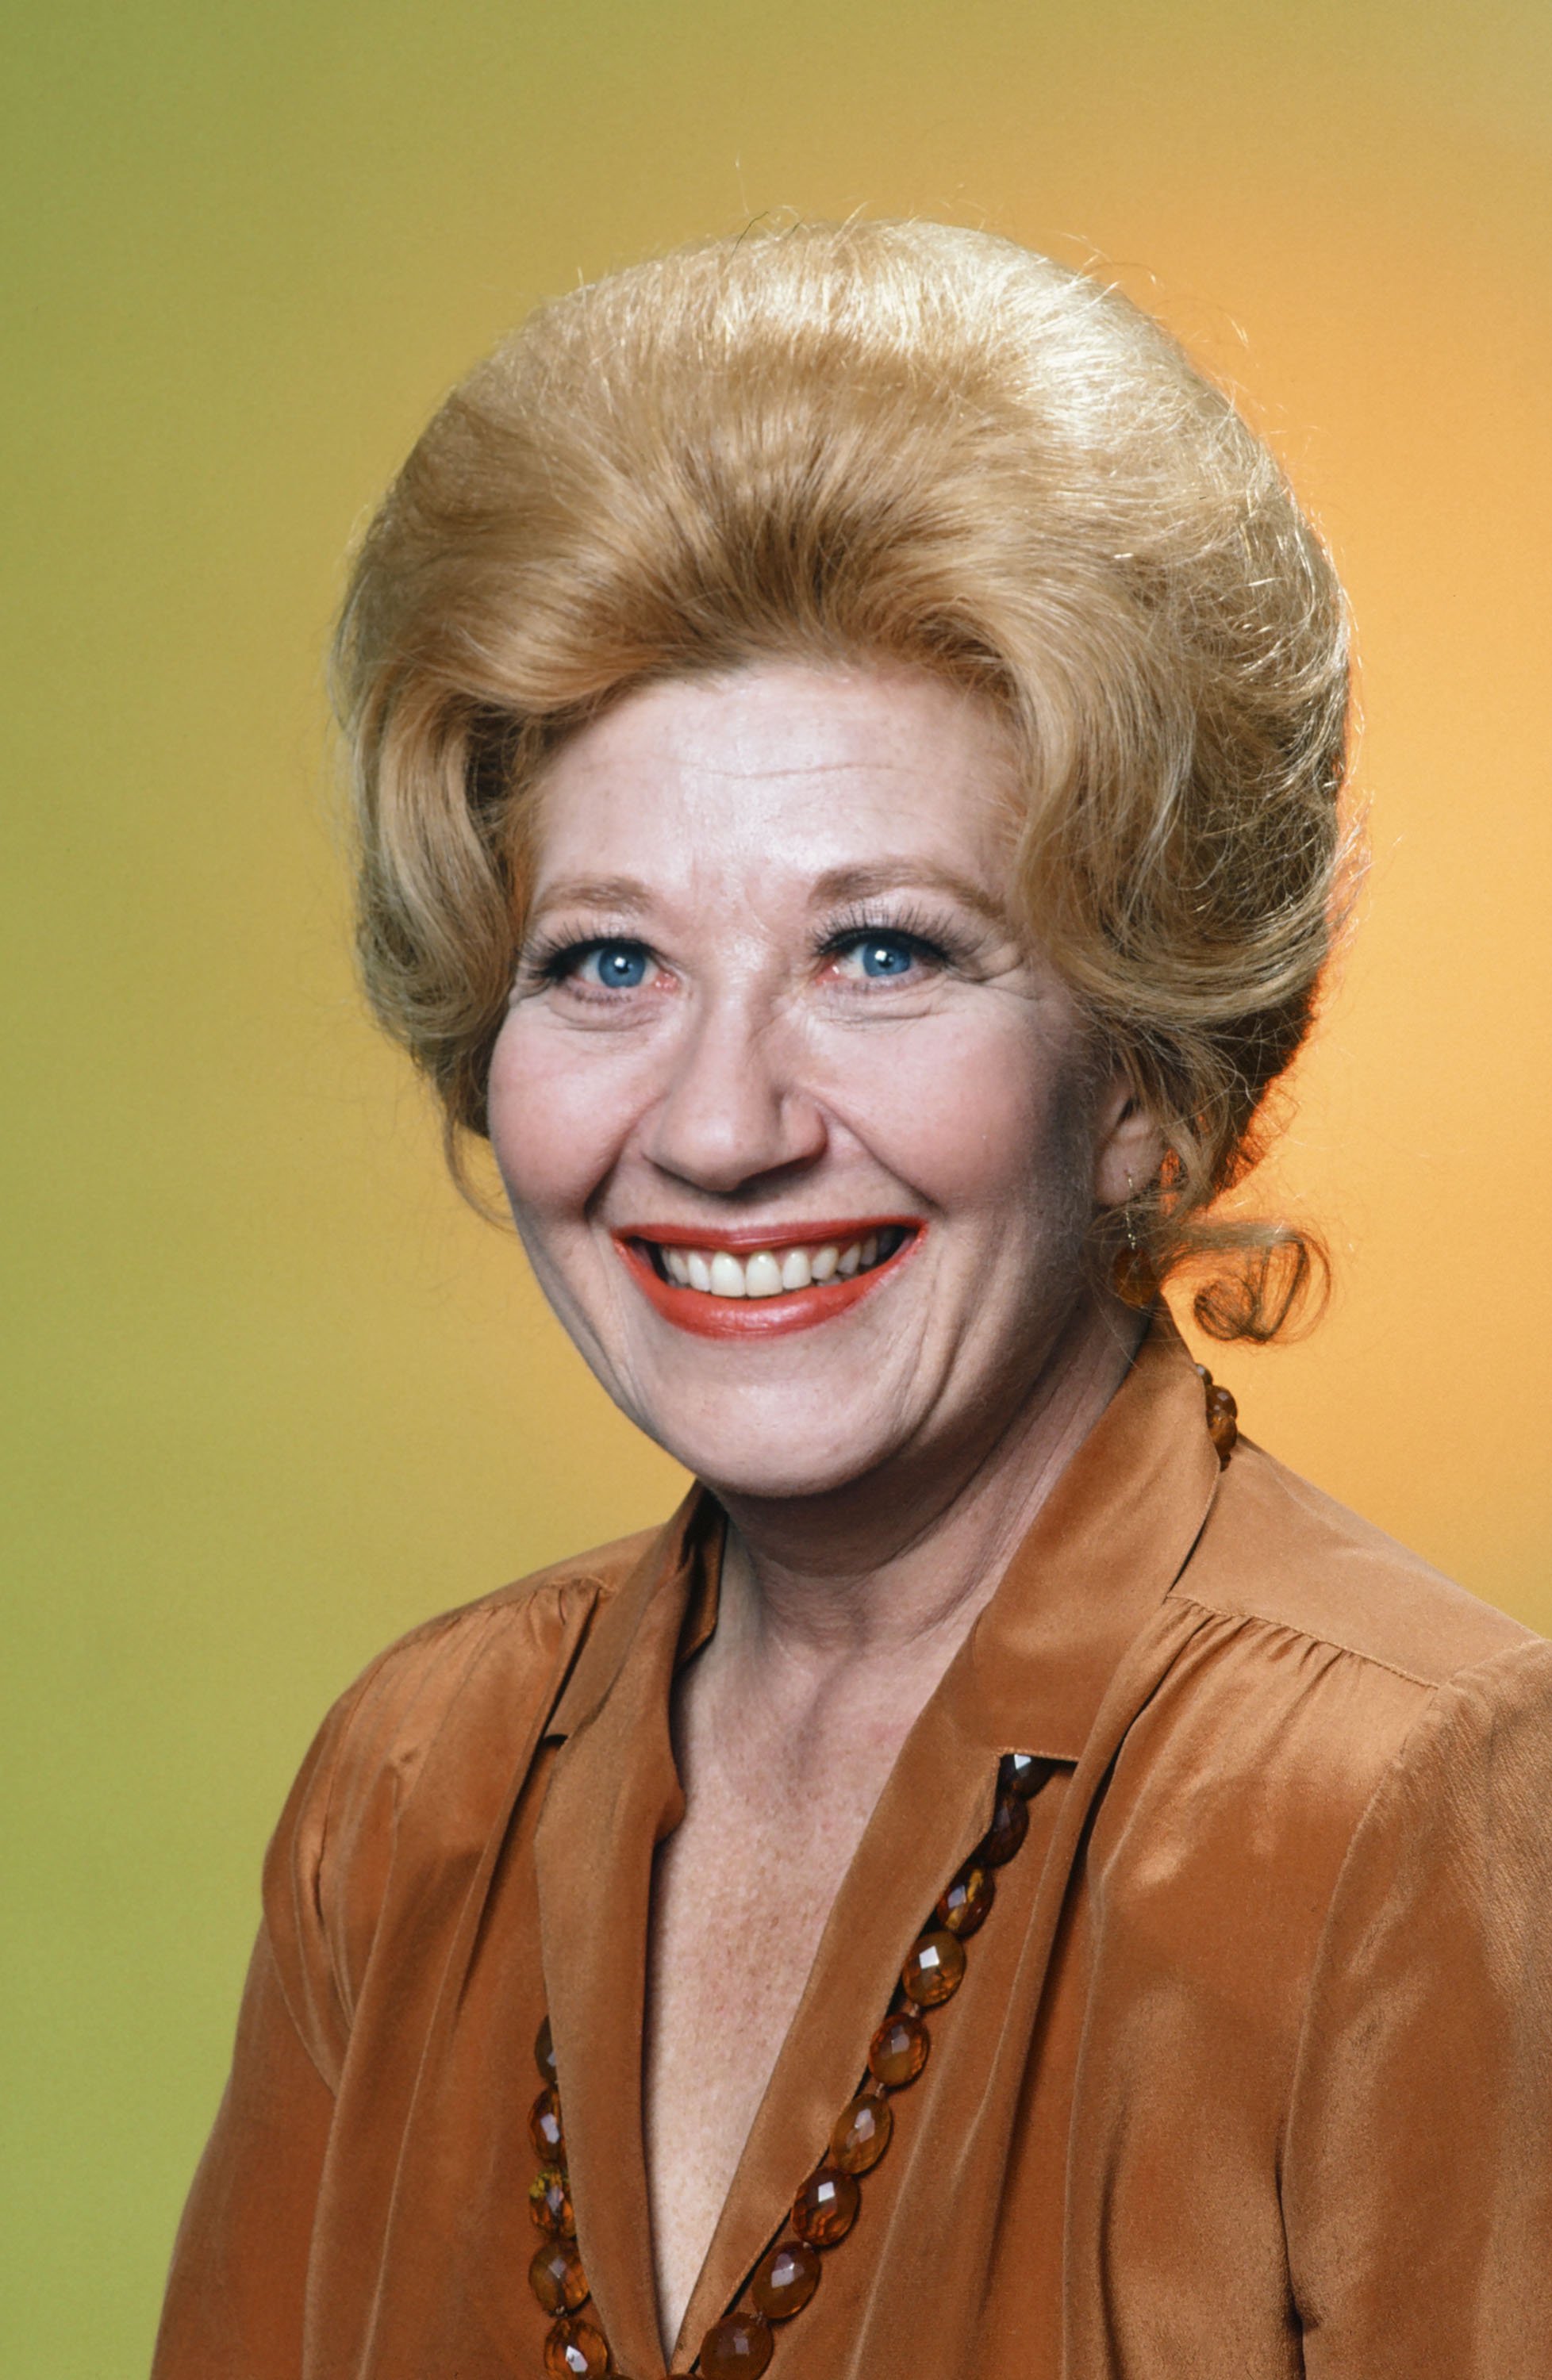  Charlotte Rae pictured as Edna Garrett for "The Facts of Life." | Photo: Getty Images